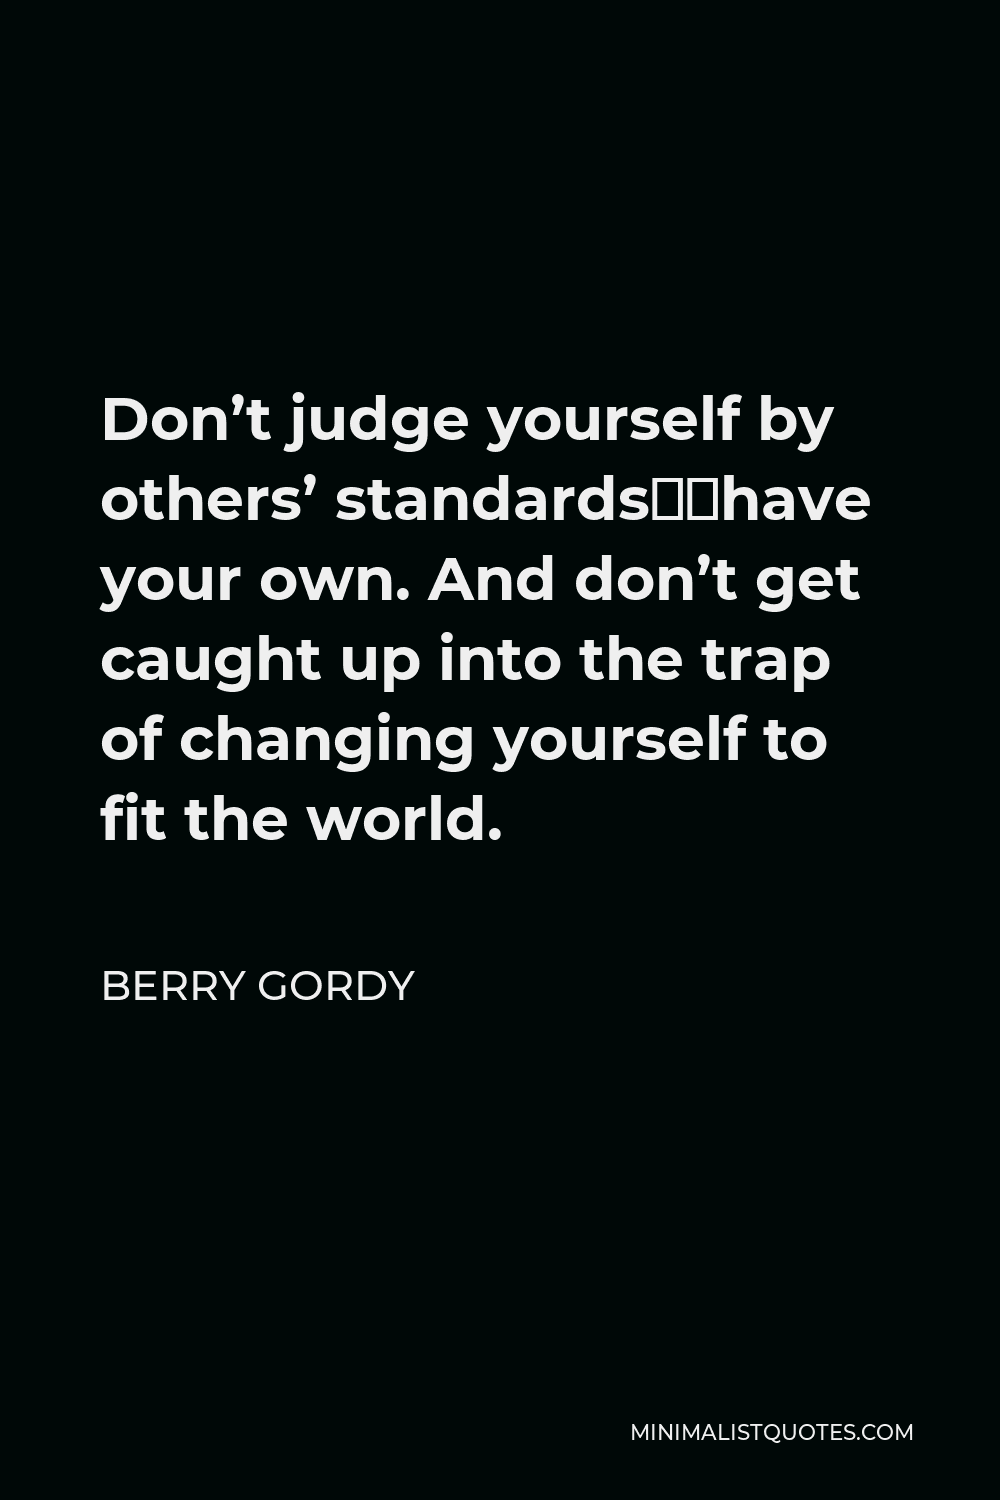 Berry Gordy Quote - Don’t judge yourself by others’ standards…have your own. And don’t get caught up into the trap of changing yourself to fit the world.